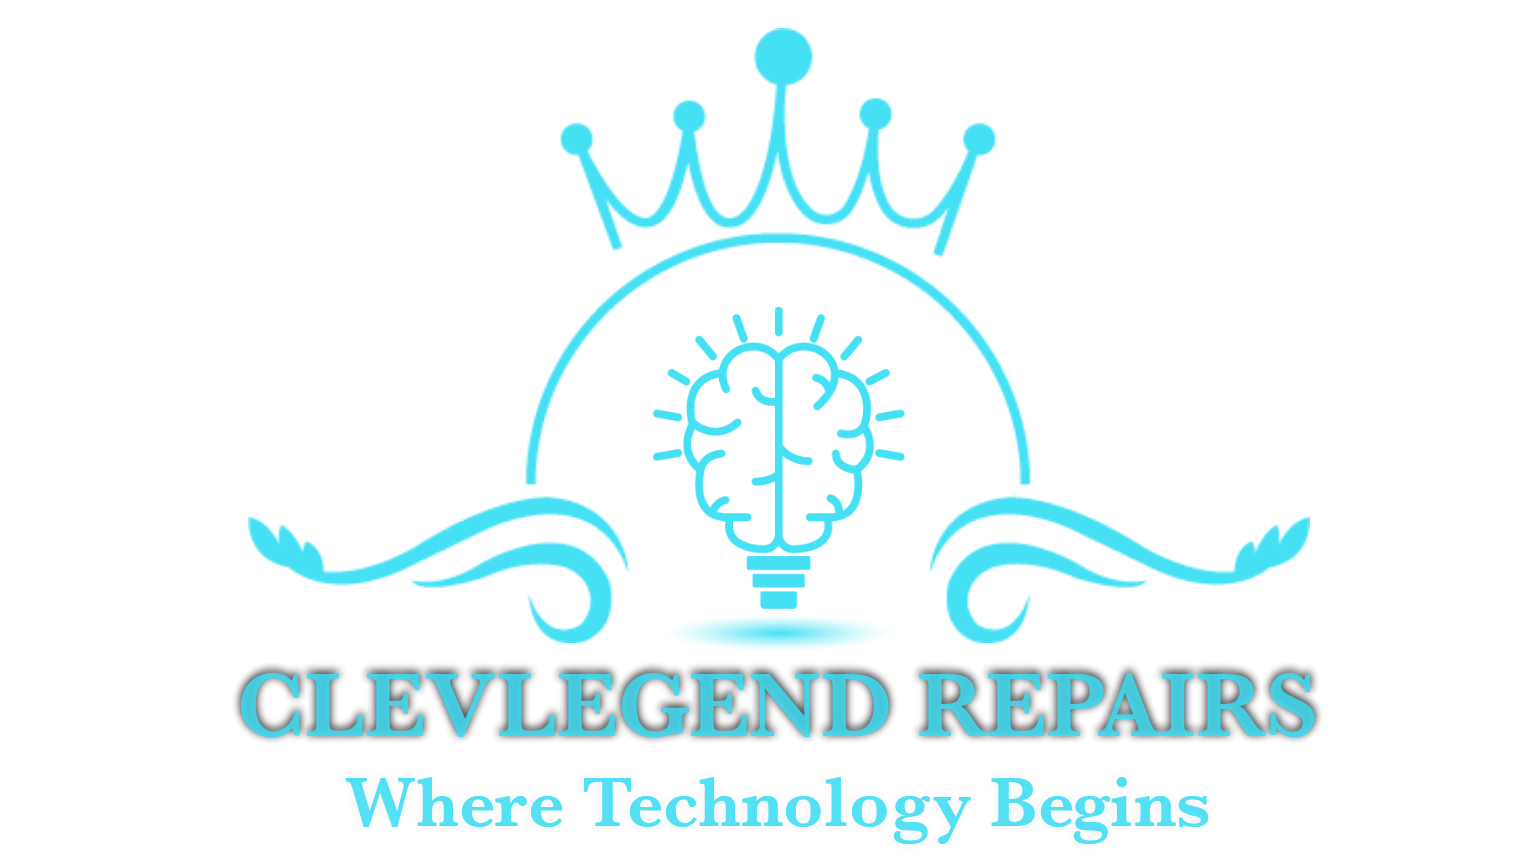 Clevlegend Repairs WE FIX IT ONCE - WE FIX IT RIGHT